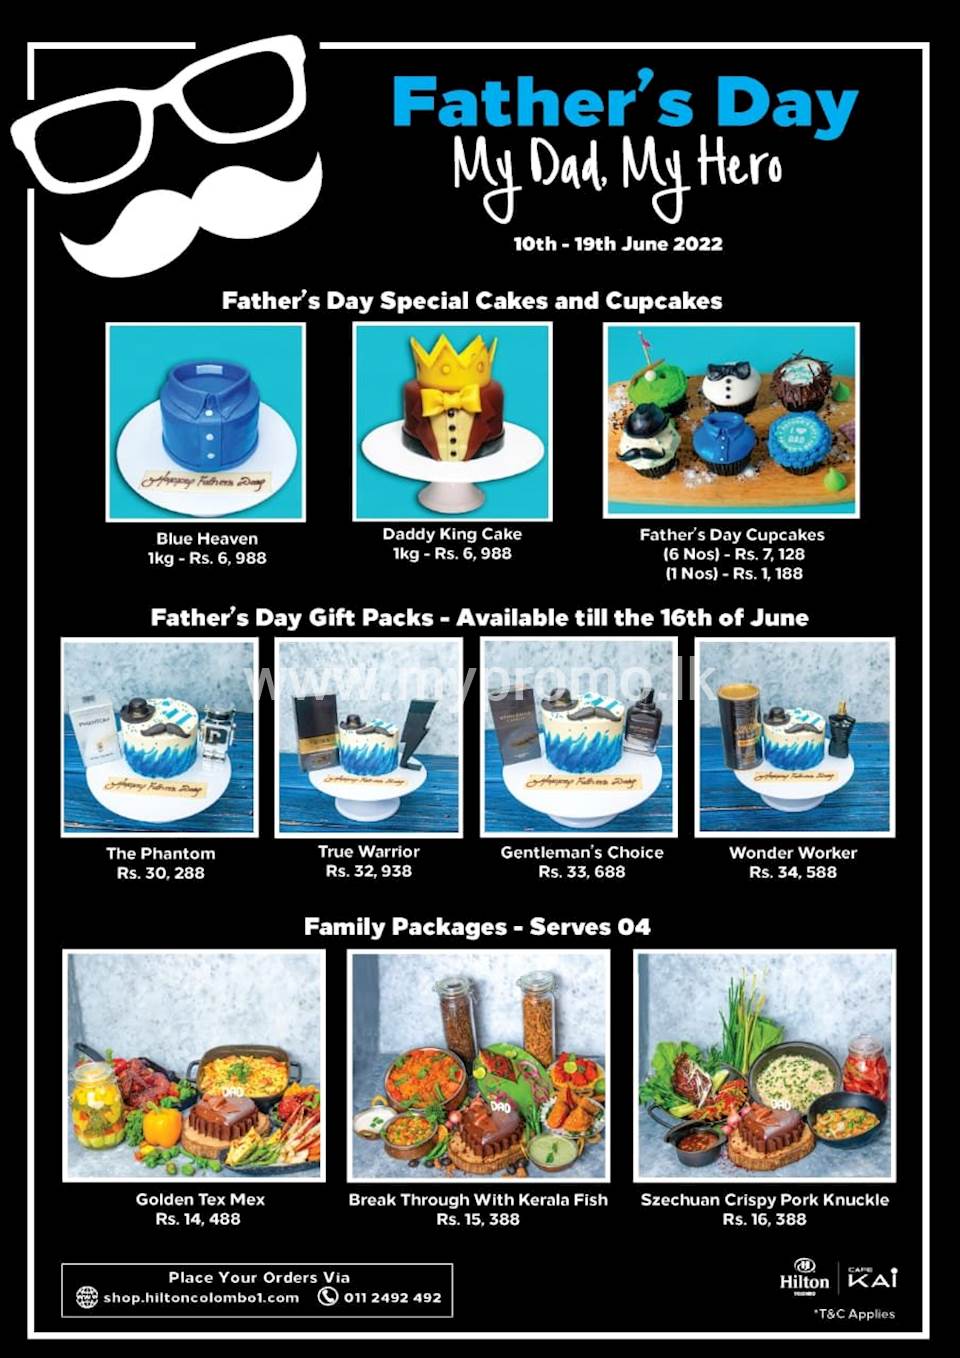 Father's Day Special Cakes and Cupcakes at The Hilton colombo